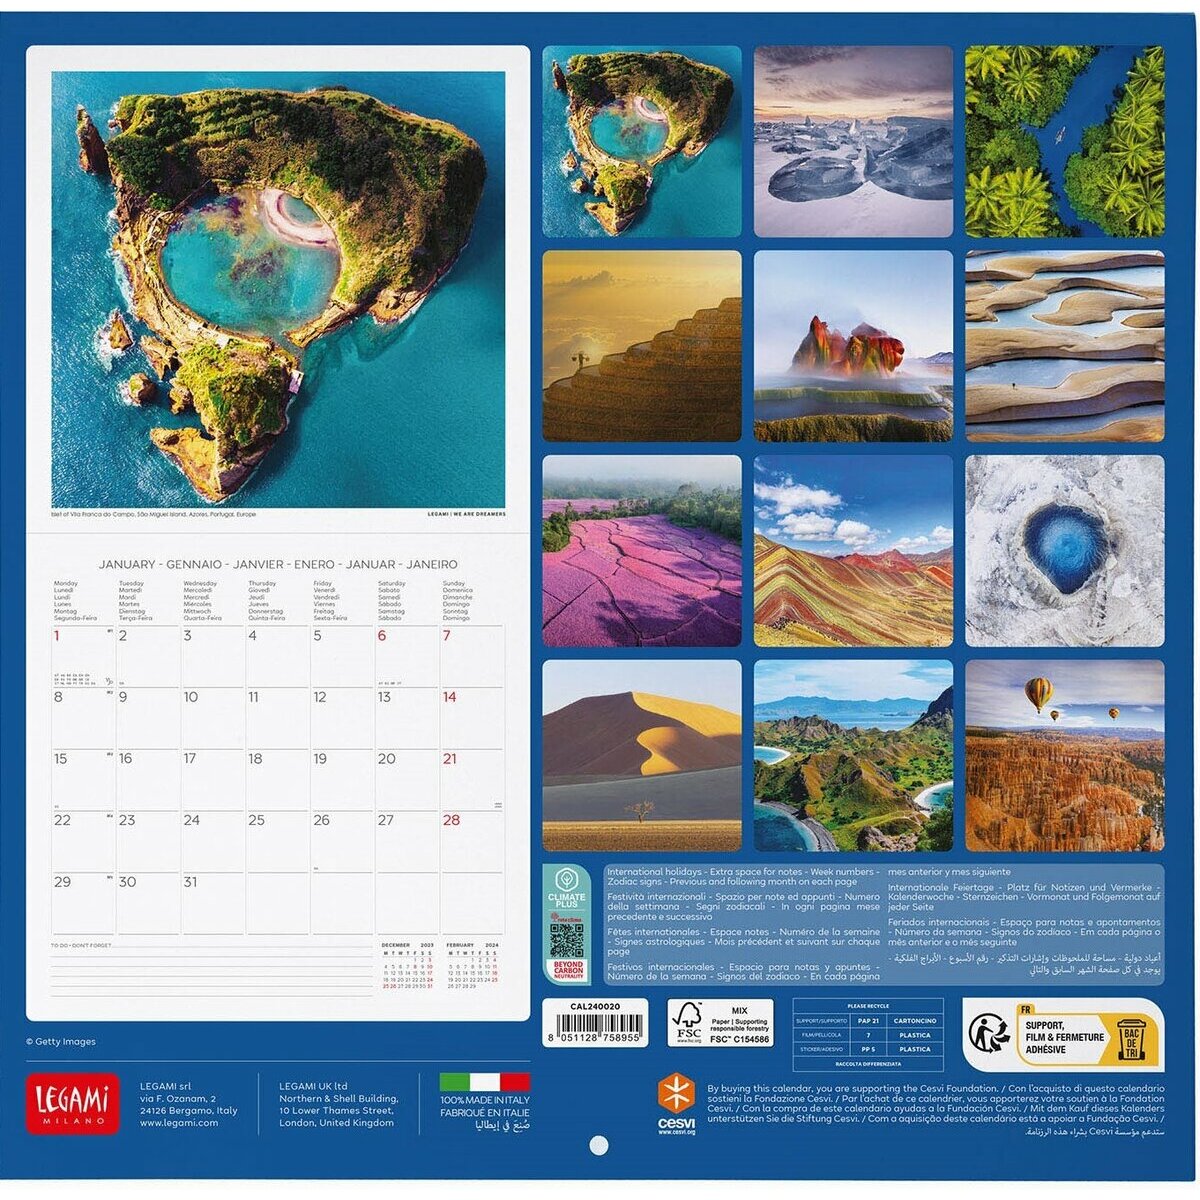 Calendrier 2024 Paysage